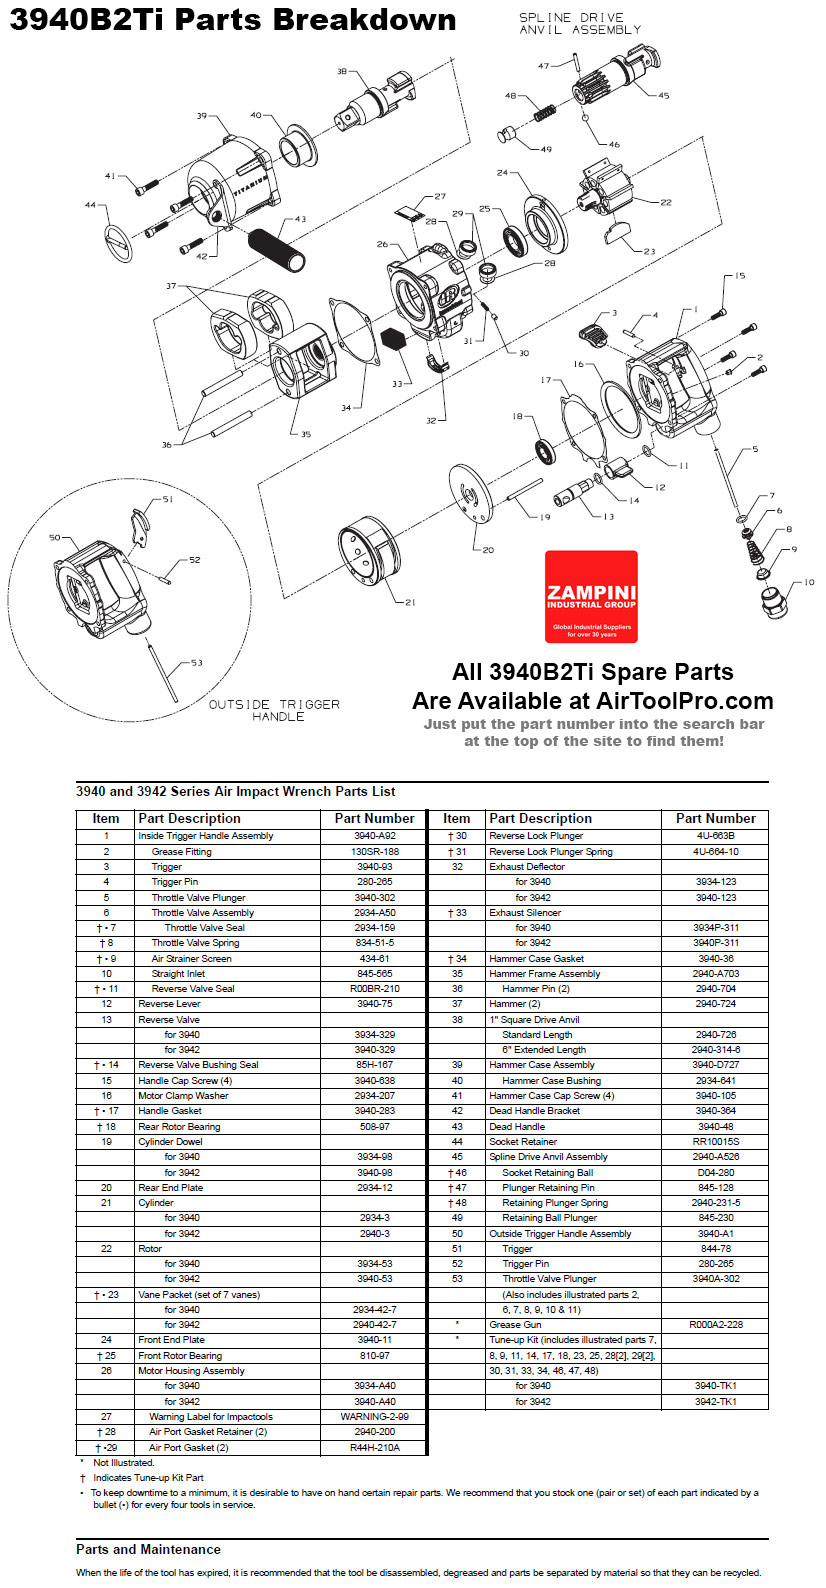 Ingersoll Rand 3940B2Ti Parts Breakdown and Parts List at AirToolPro.com